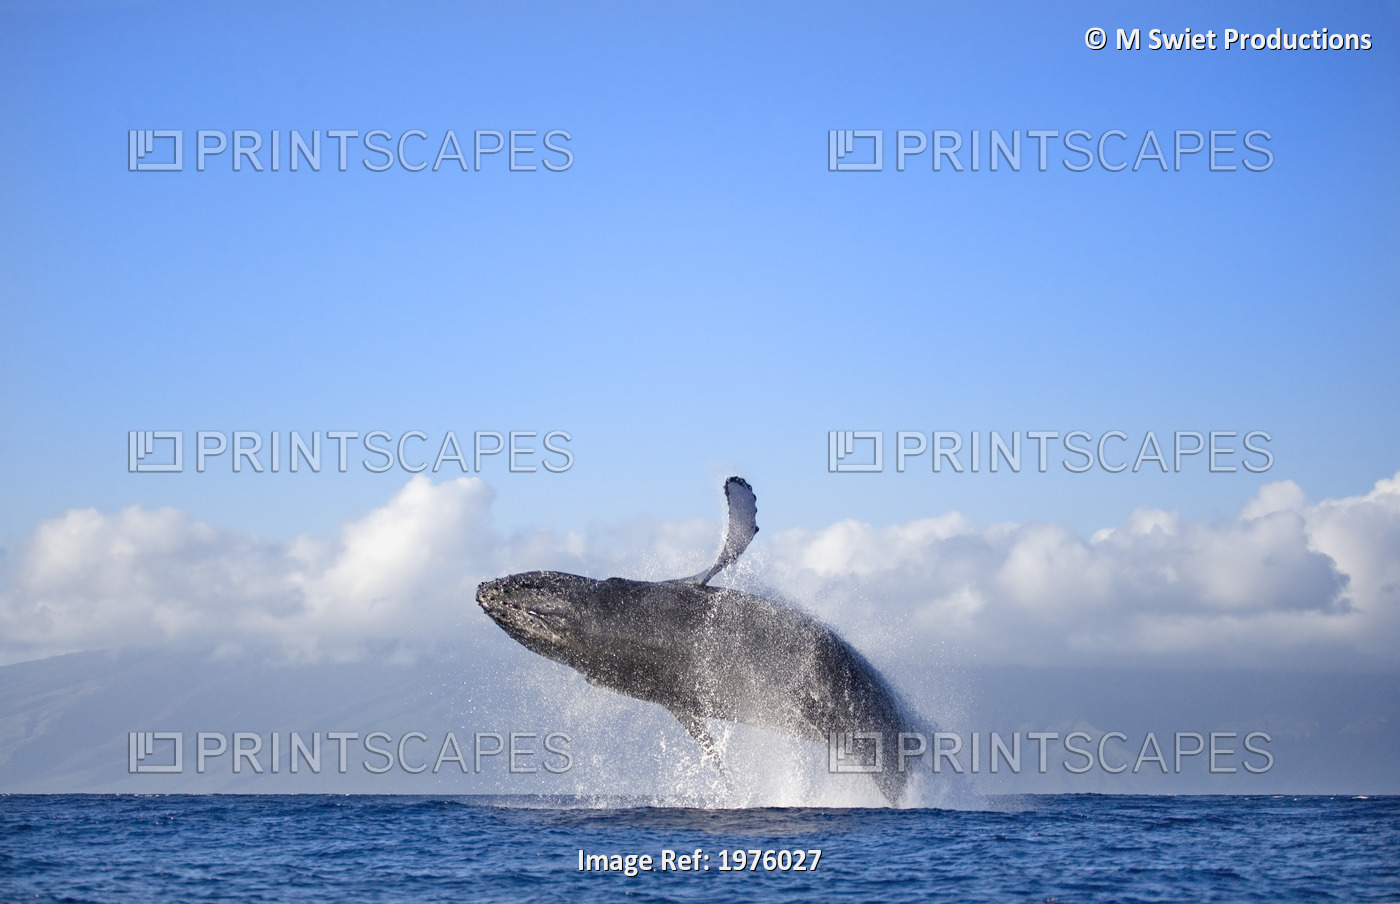 Hawaii, Maui, Humpback Whale Breaching With Island In The Background.